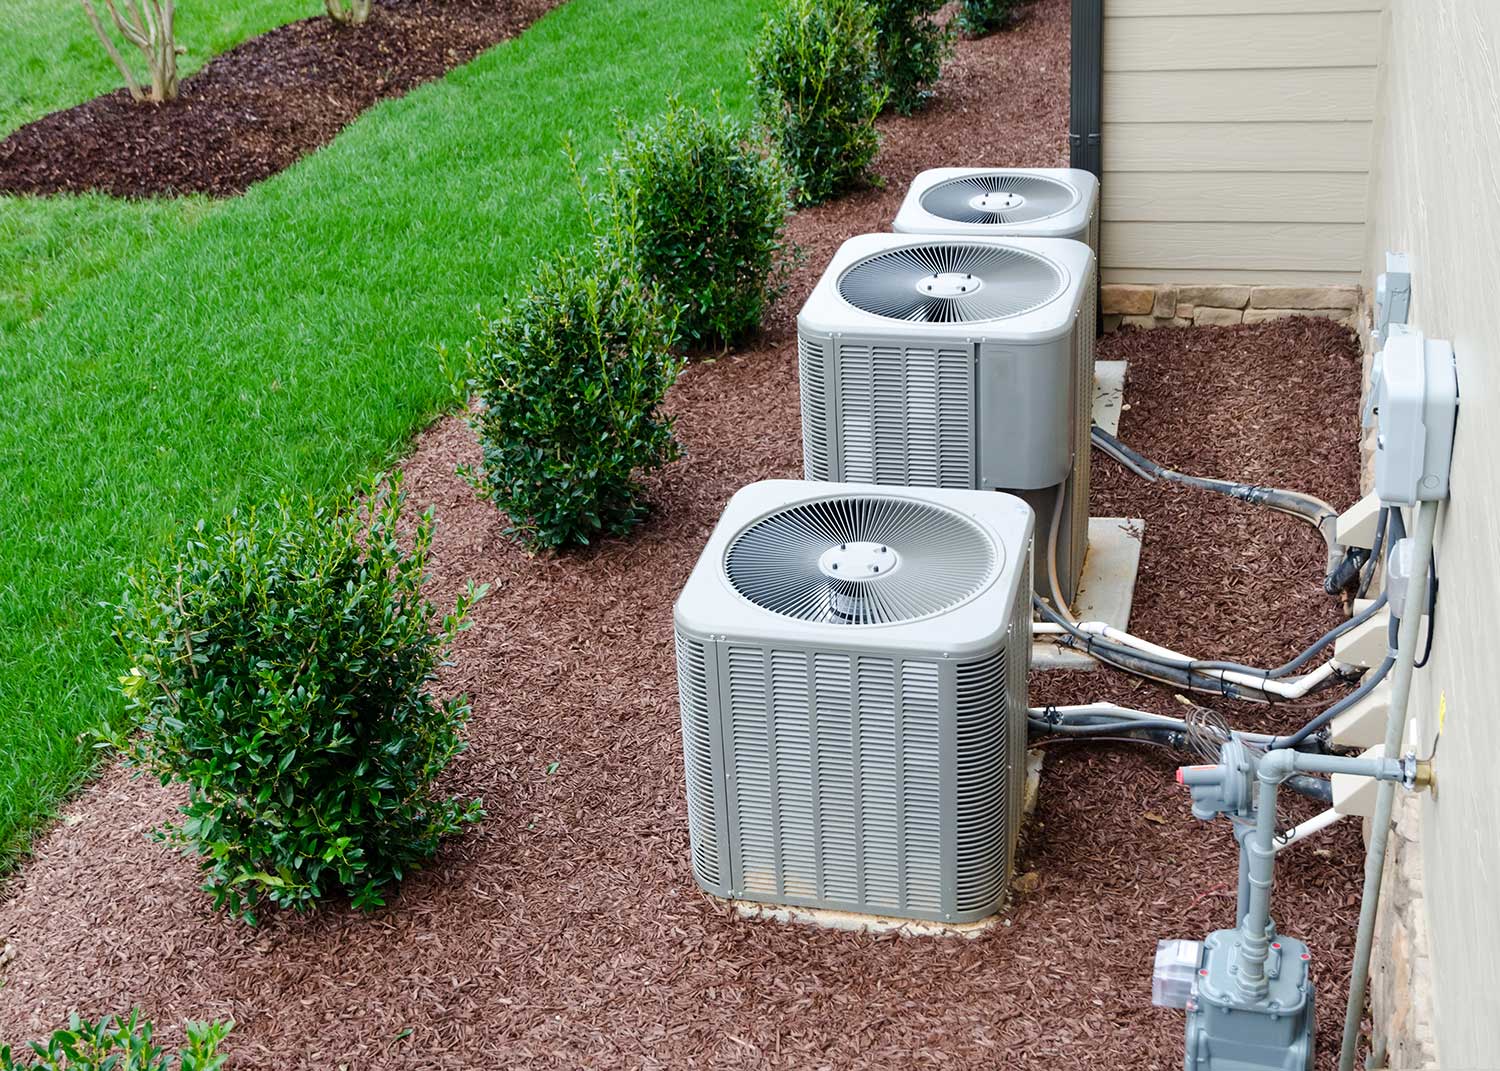 Knowing when to turn your HVAC system off